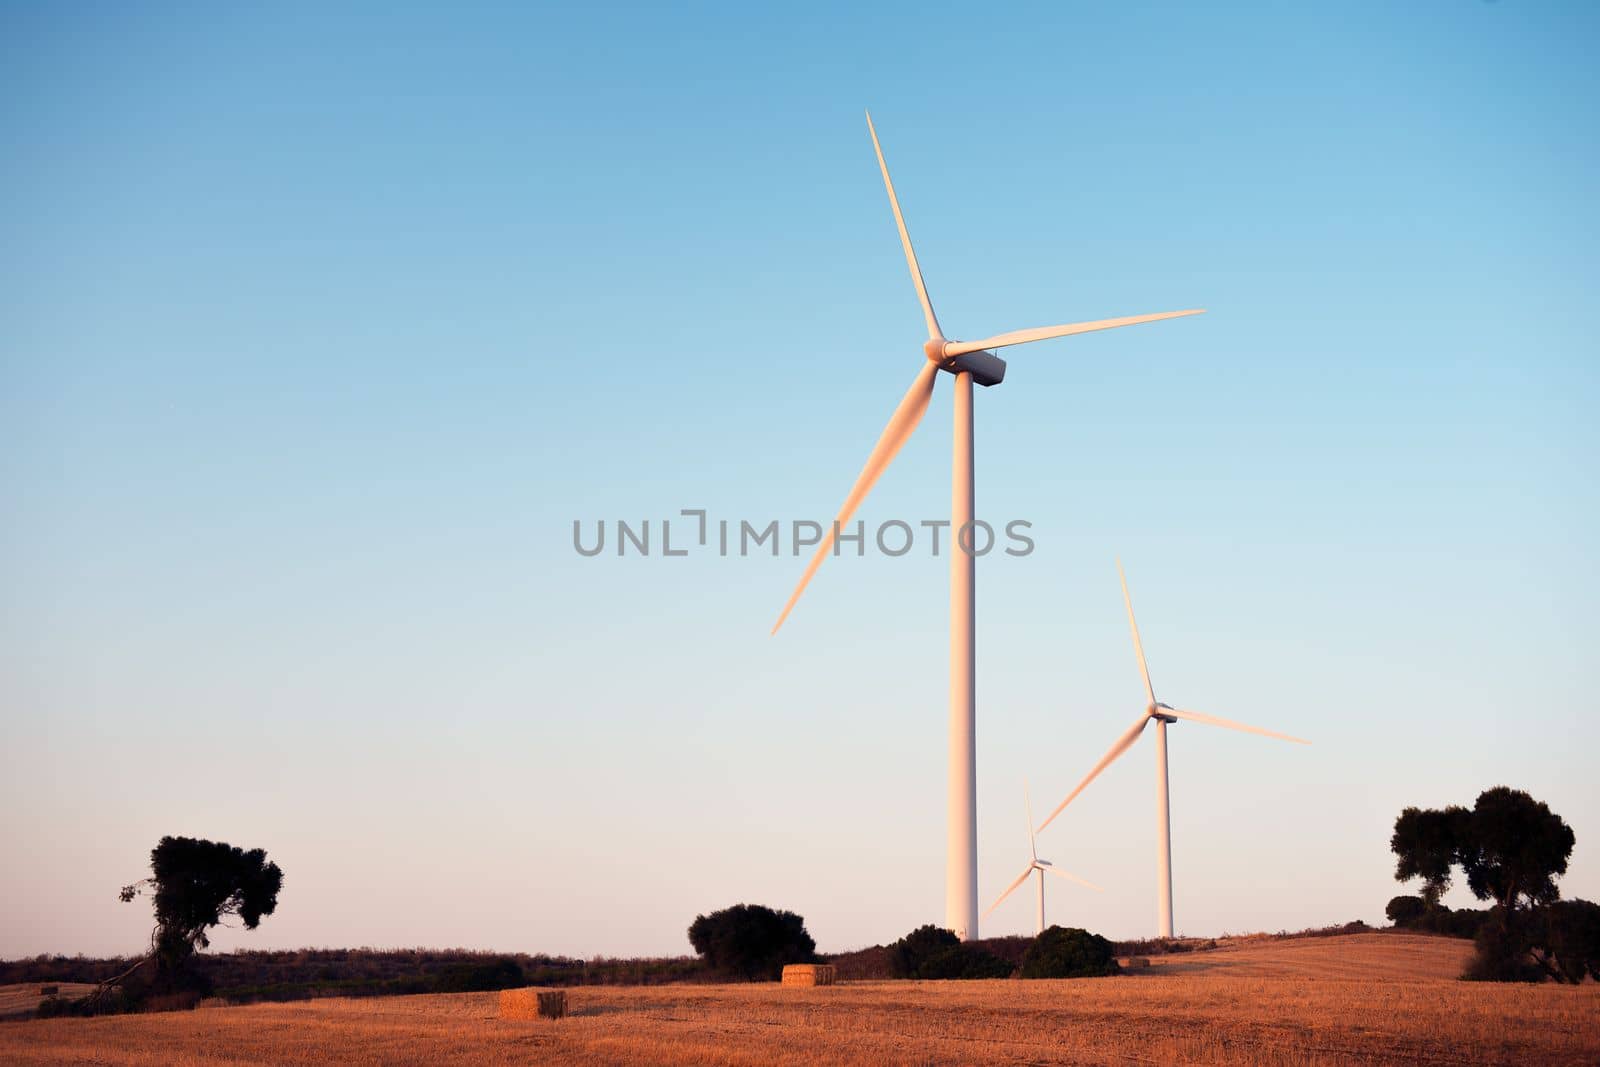 Three windmills on a small hill producing clean energy in a wind farm at sunset. It is in a rural environment surrounded by crops and nature, the sky is clean and clear. Copy space